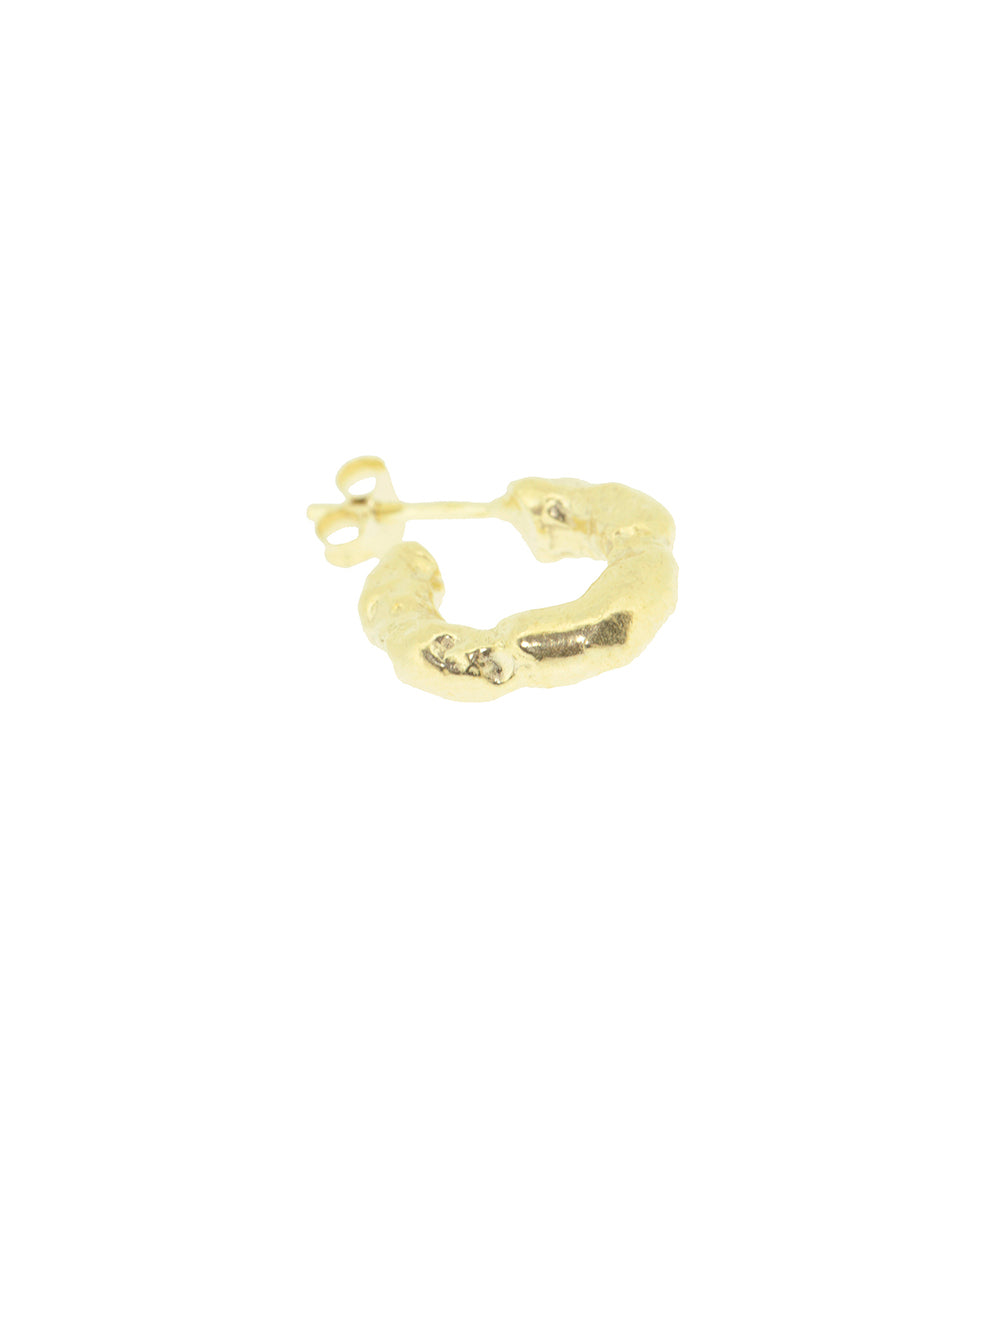 Be my baby S | 14K Gold Plated